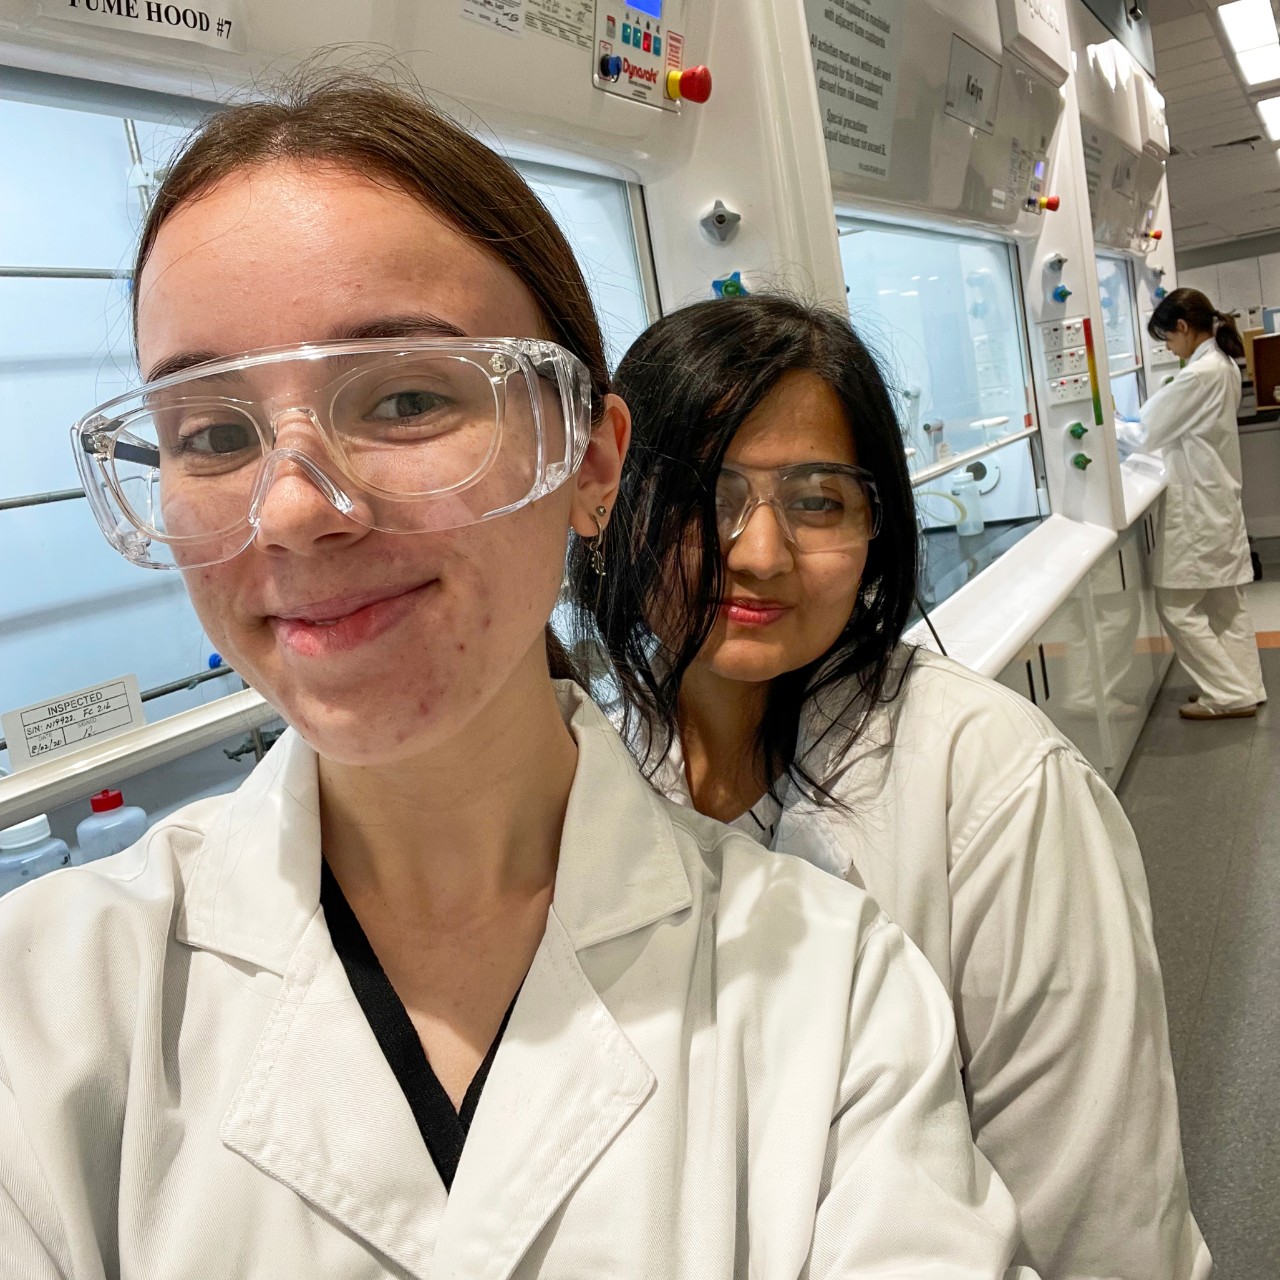 Cameryn Smider wearing goggles and lab coat with a fellow student in the lab.